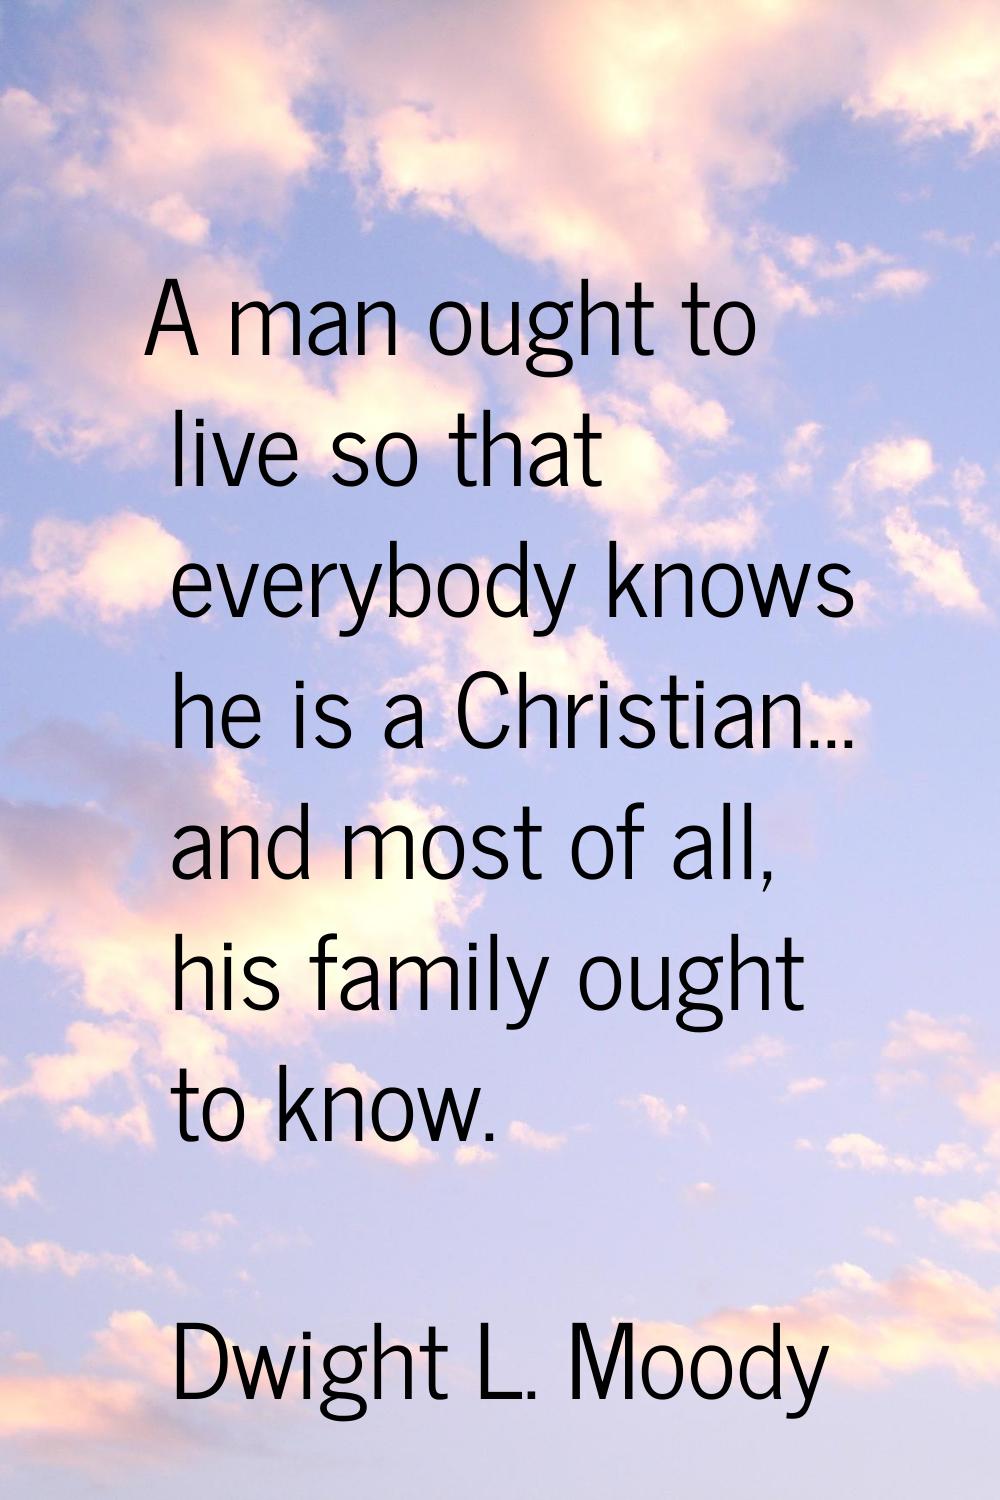 A man ought to live so that everybody knows he is a Christian... and most of all, his family ought 